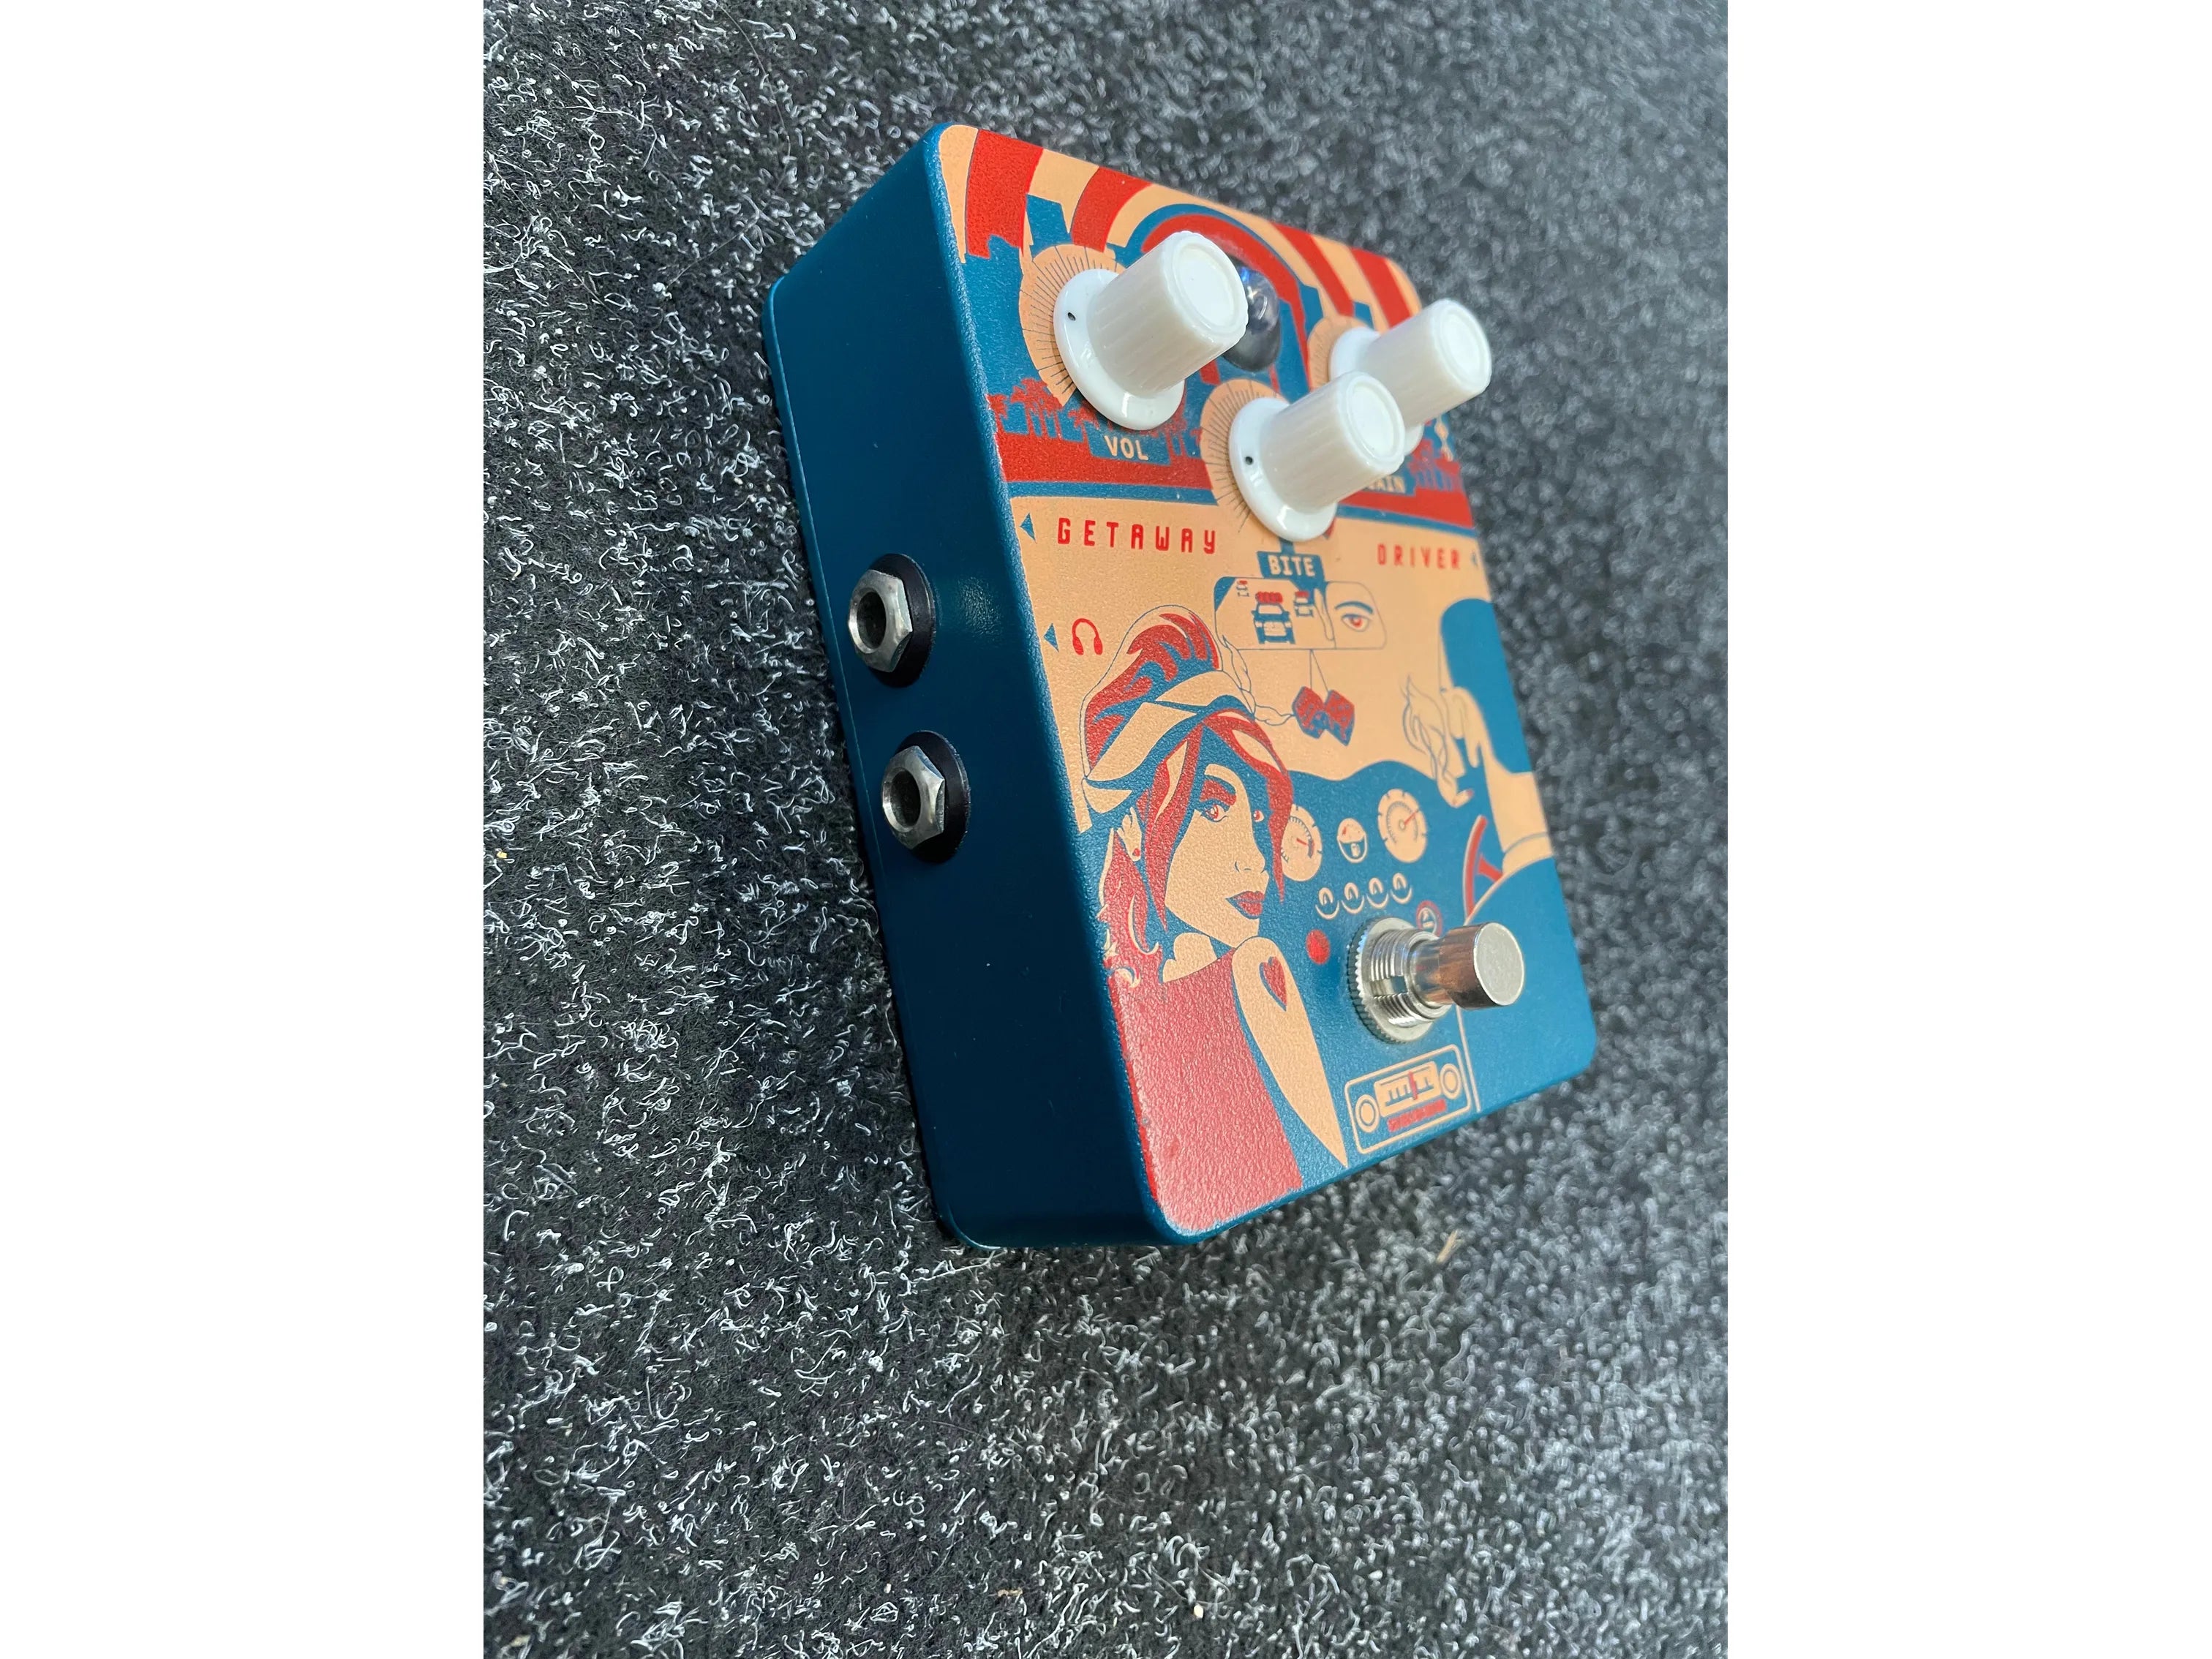 Orange Getaway Driver Overdrive Pre-Owned